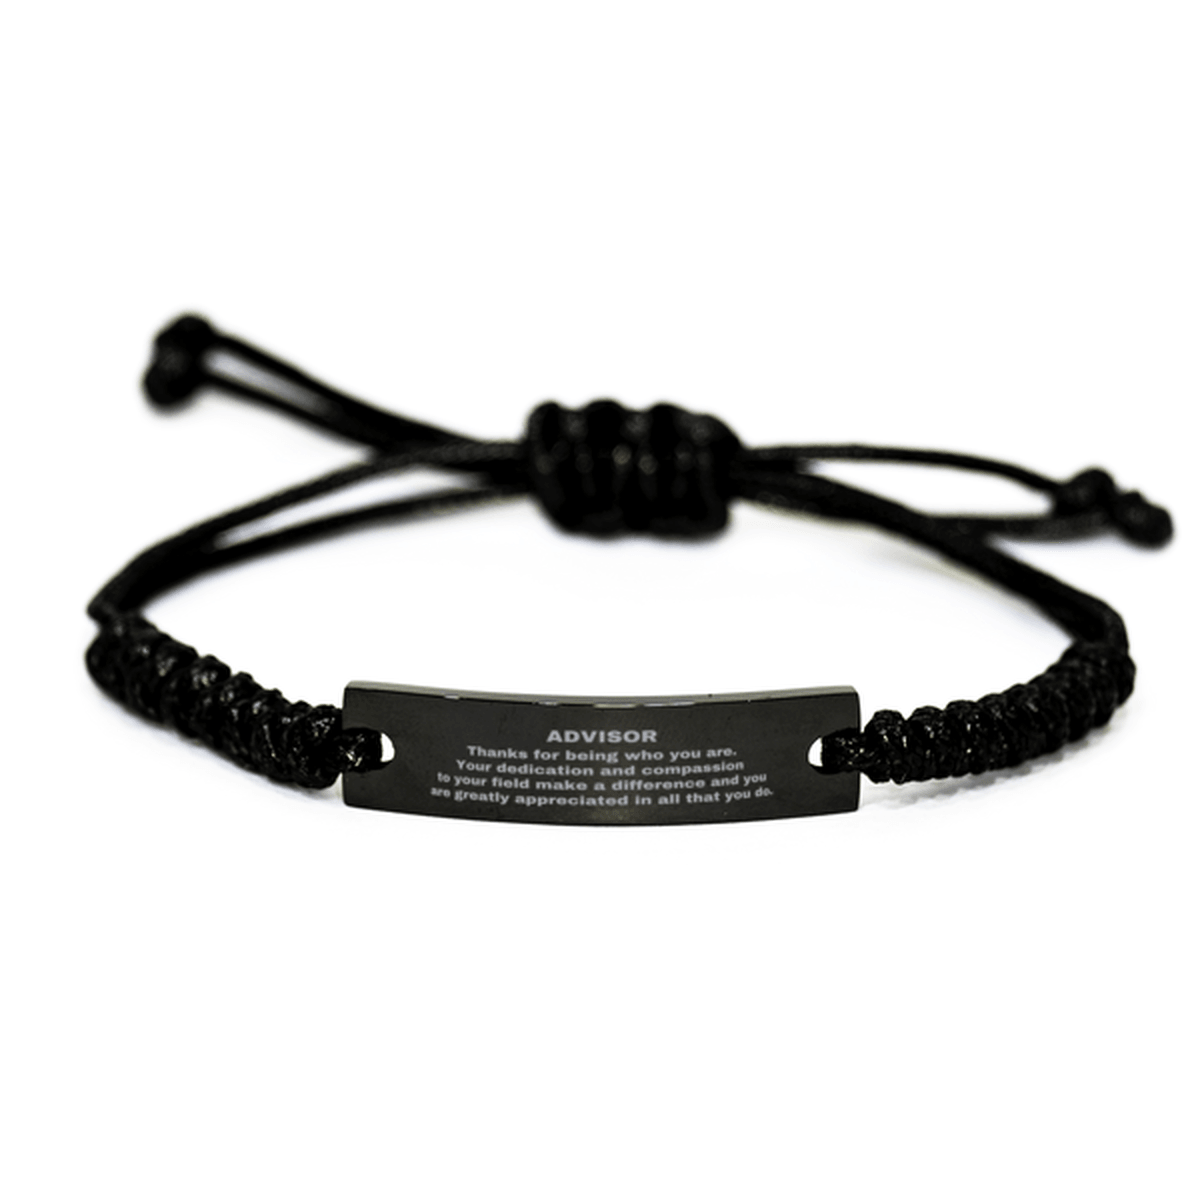 Advisor Black Braided Leather Rope Engraved Bracelet - Thanks for being who you are - Birthday Christmas Jewelry Gifts Coworkers Colleague Boss - Mallard Moon Gift Shop